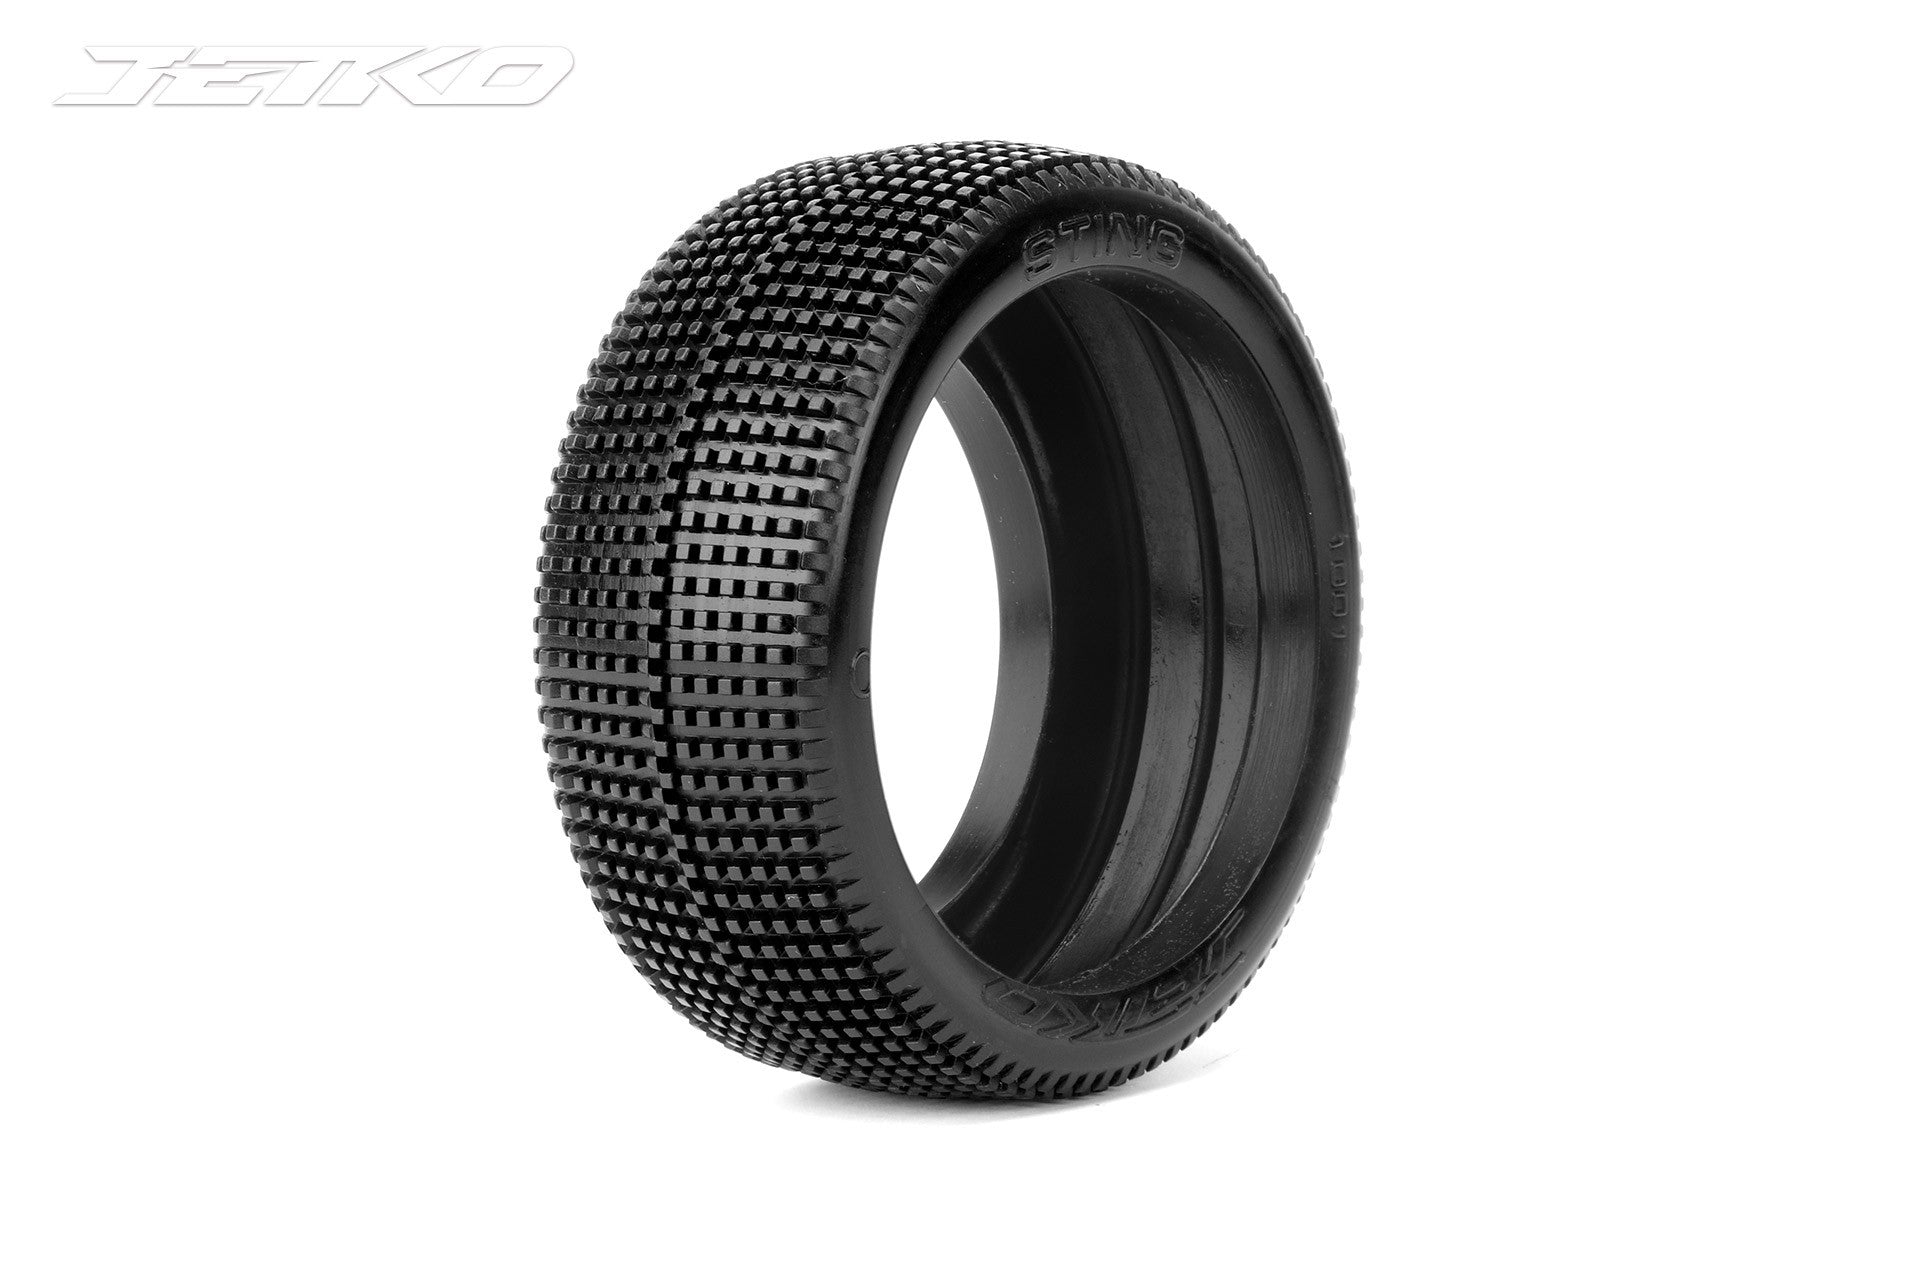 JETKO STING S.SOFT 1:8 BUGGY (4) TYRES ONLY